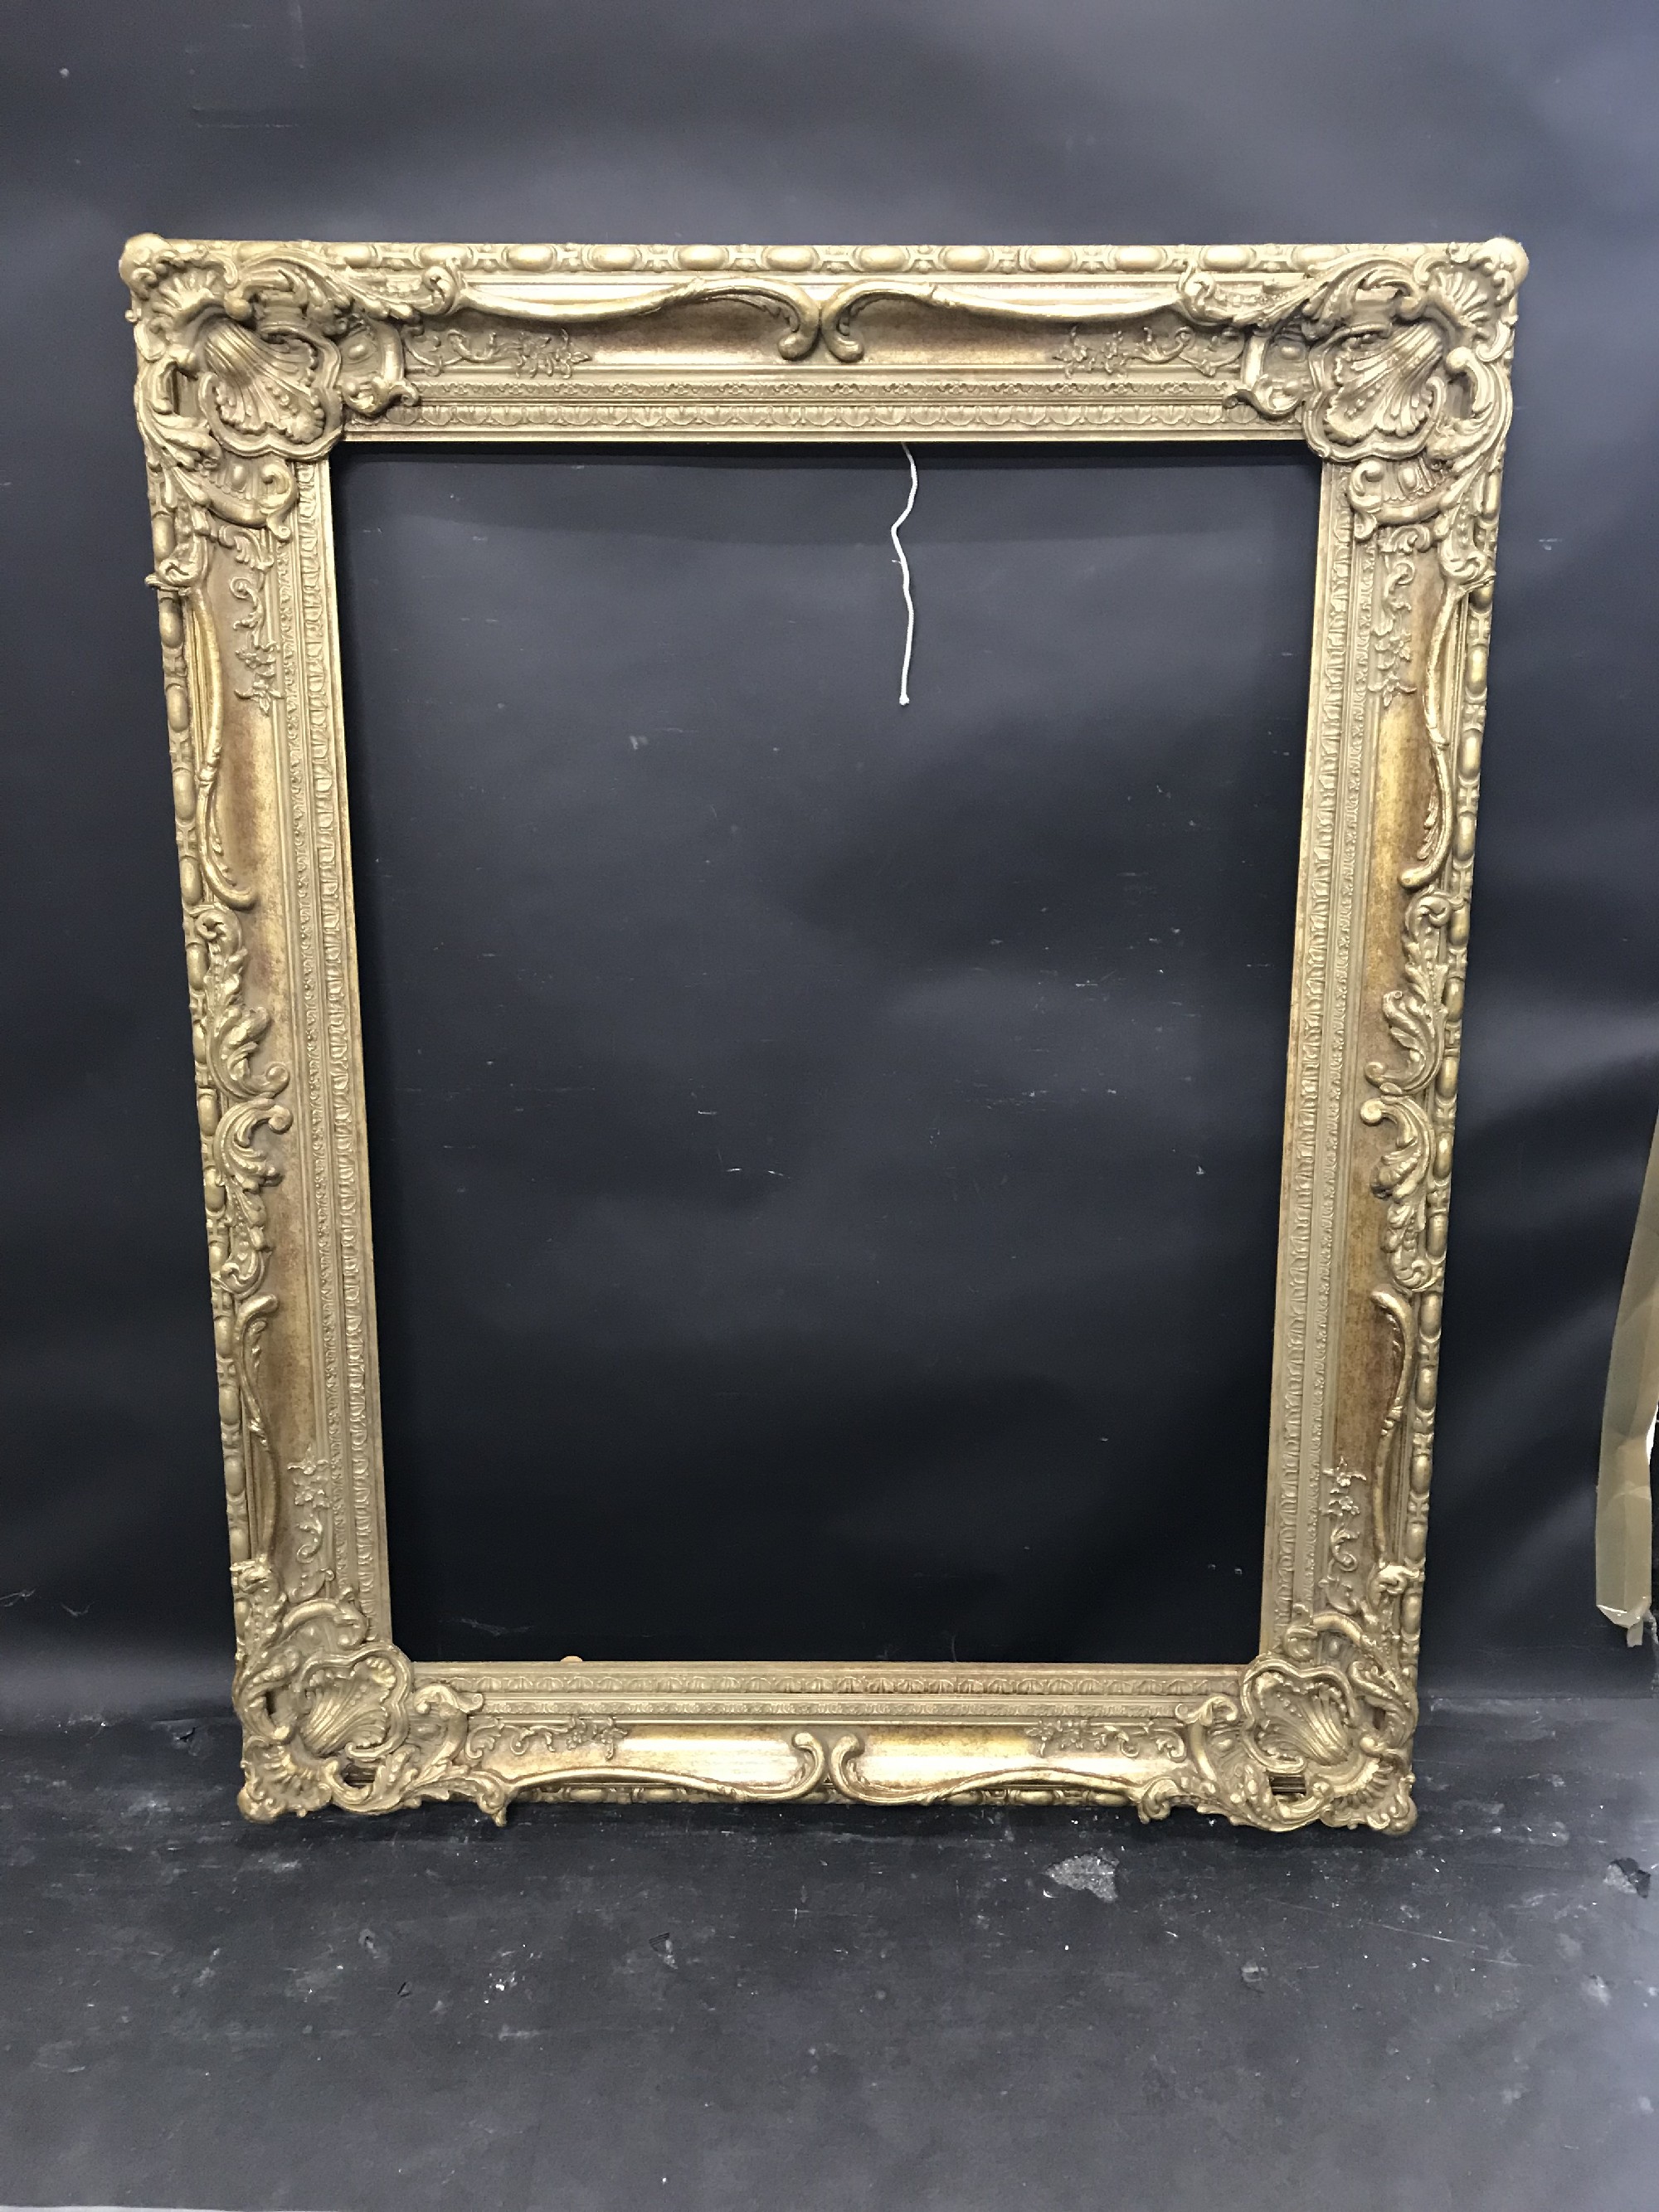 20th Century English School. A Gilt Composition Frame, with Swept Centres and Corners, 40" x 30". - Image 2 of 3